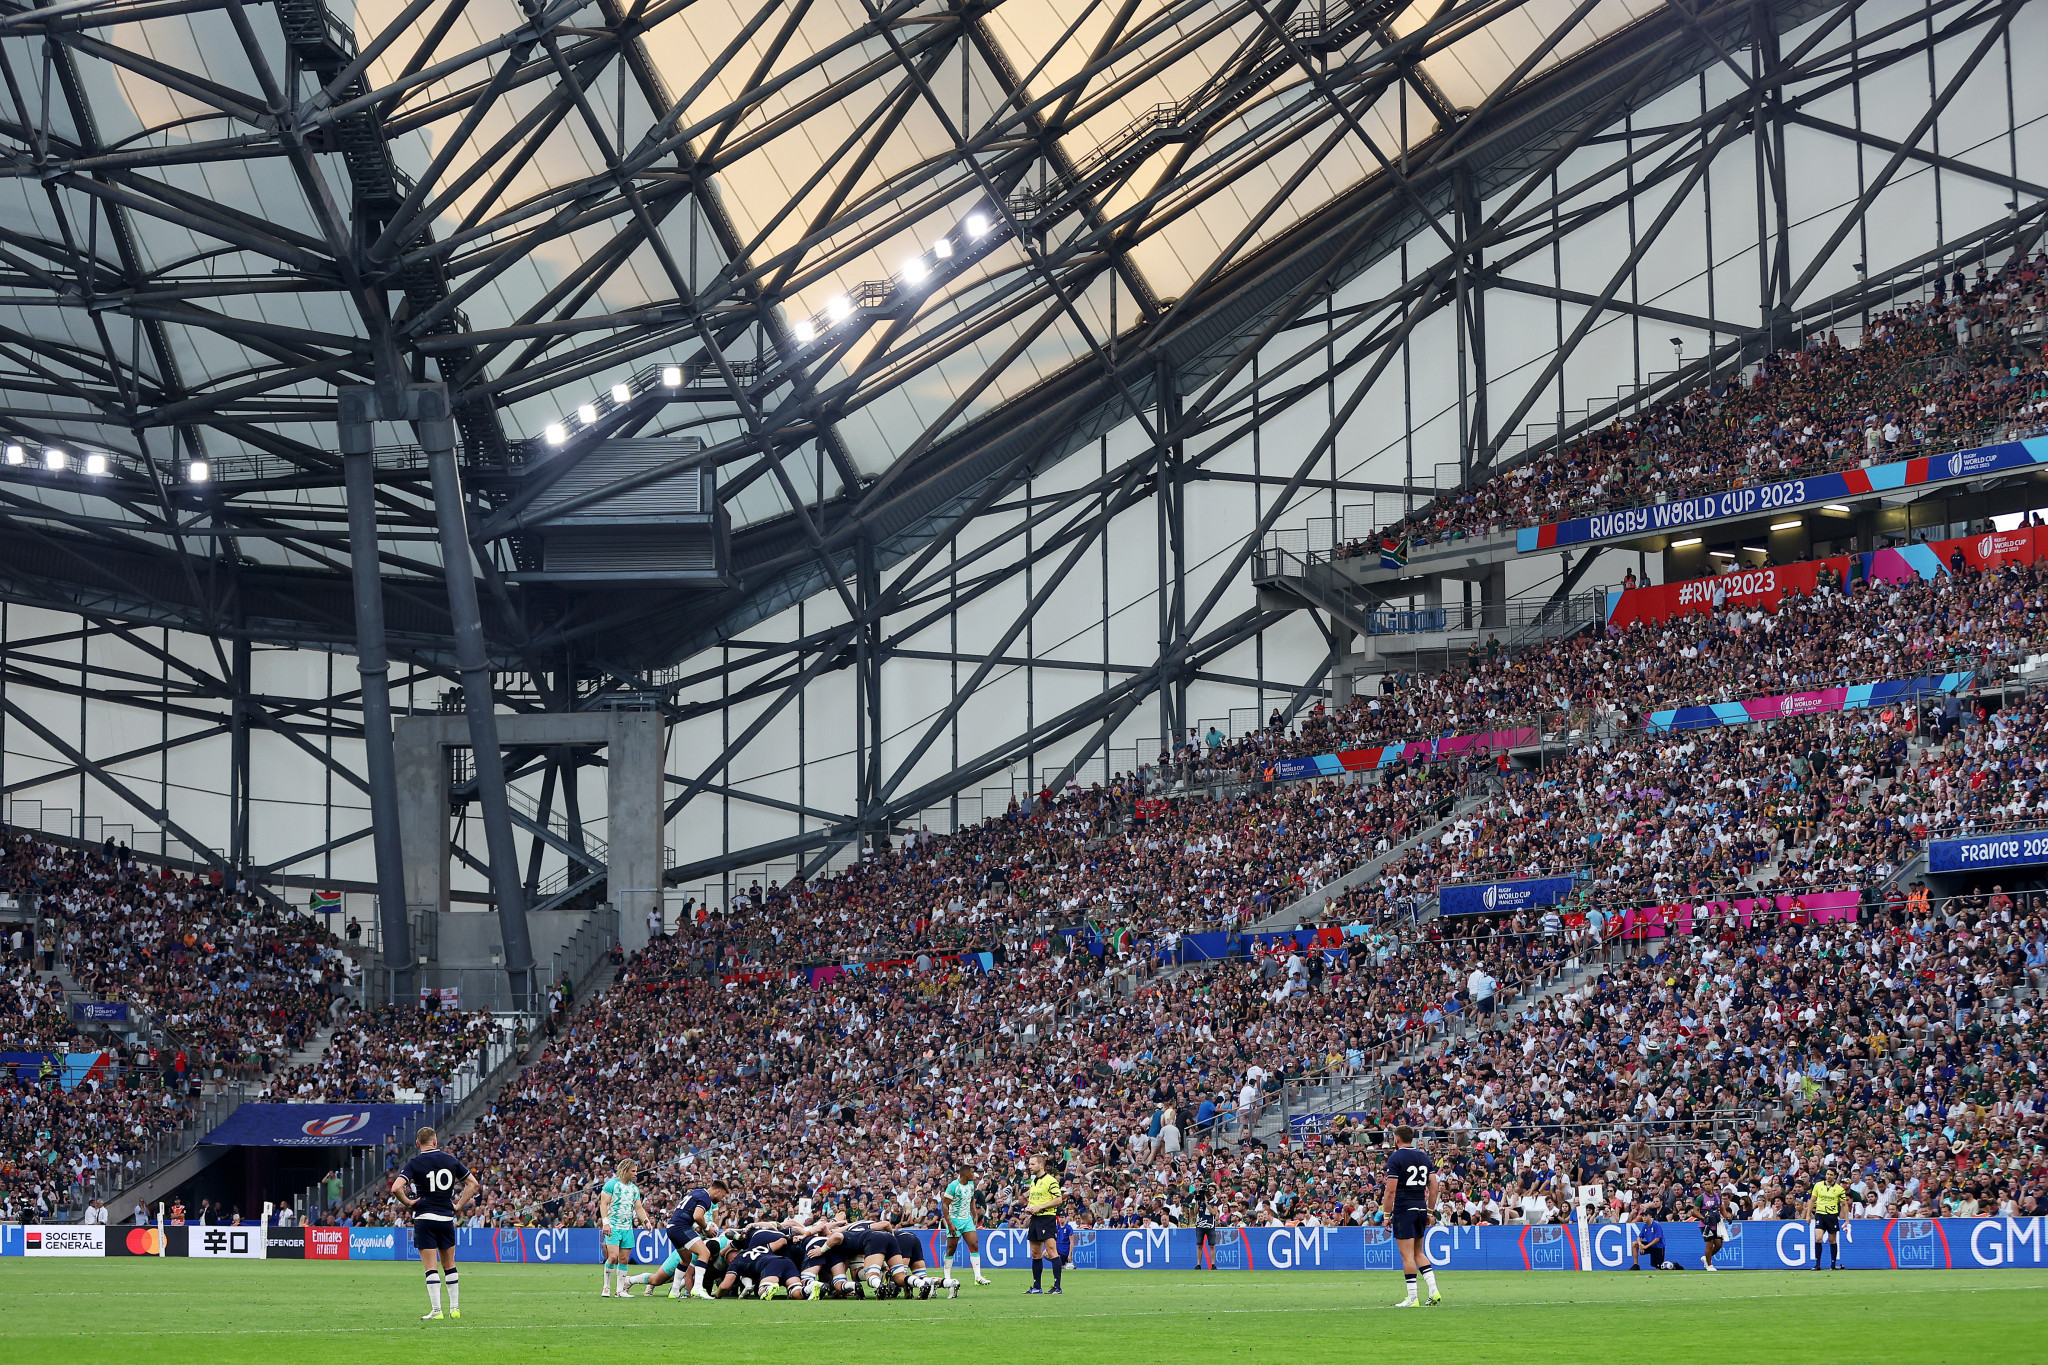 The Stade Vélodrome in Marseille is among the venues set to be used at Paris 2024, but doubts persist over France's ability to safely stage next year's Olympics and Paralympics ©Getty Images